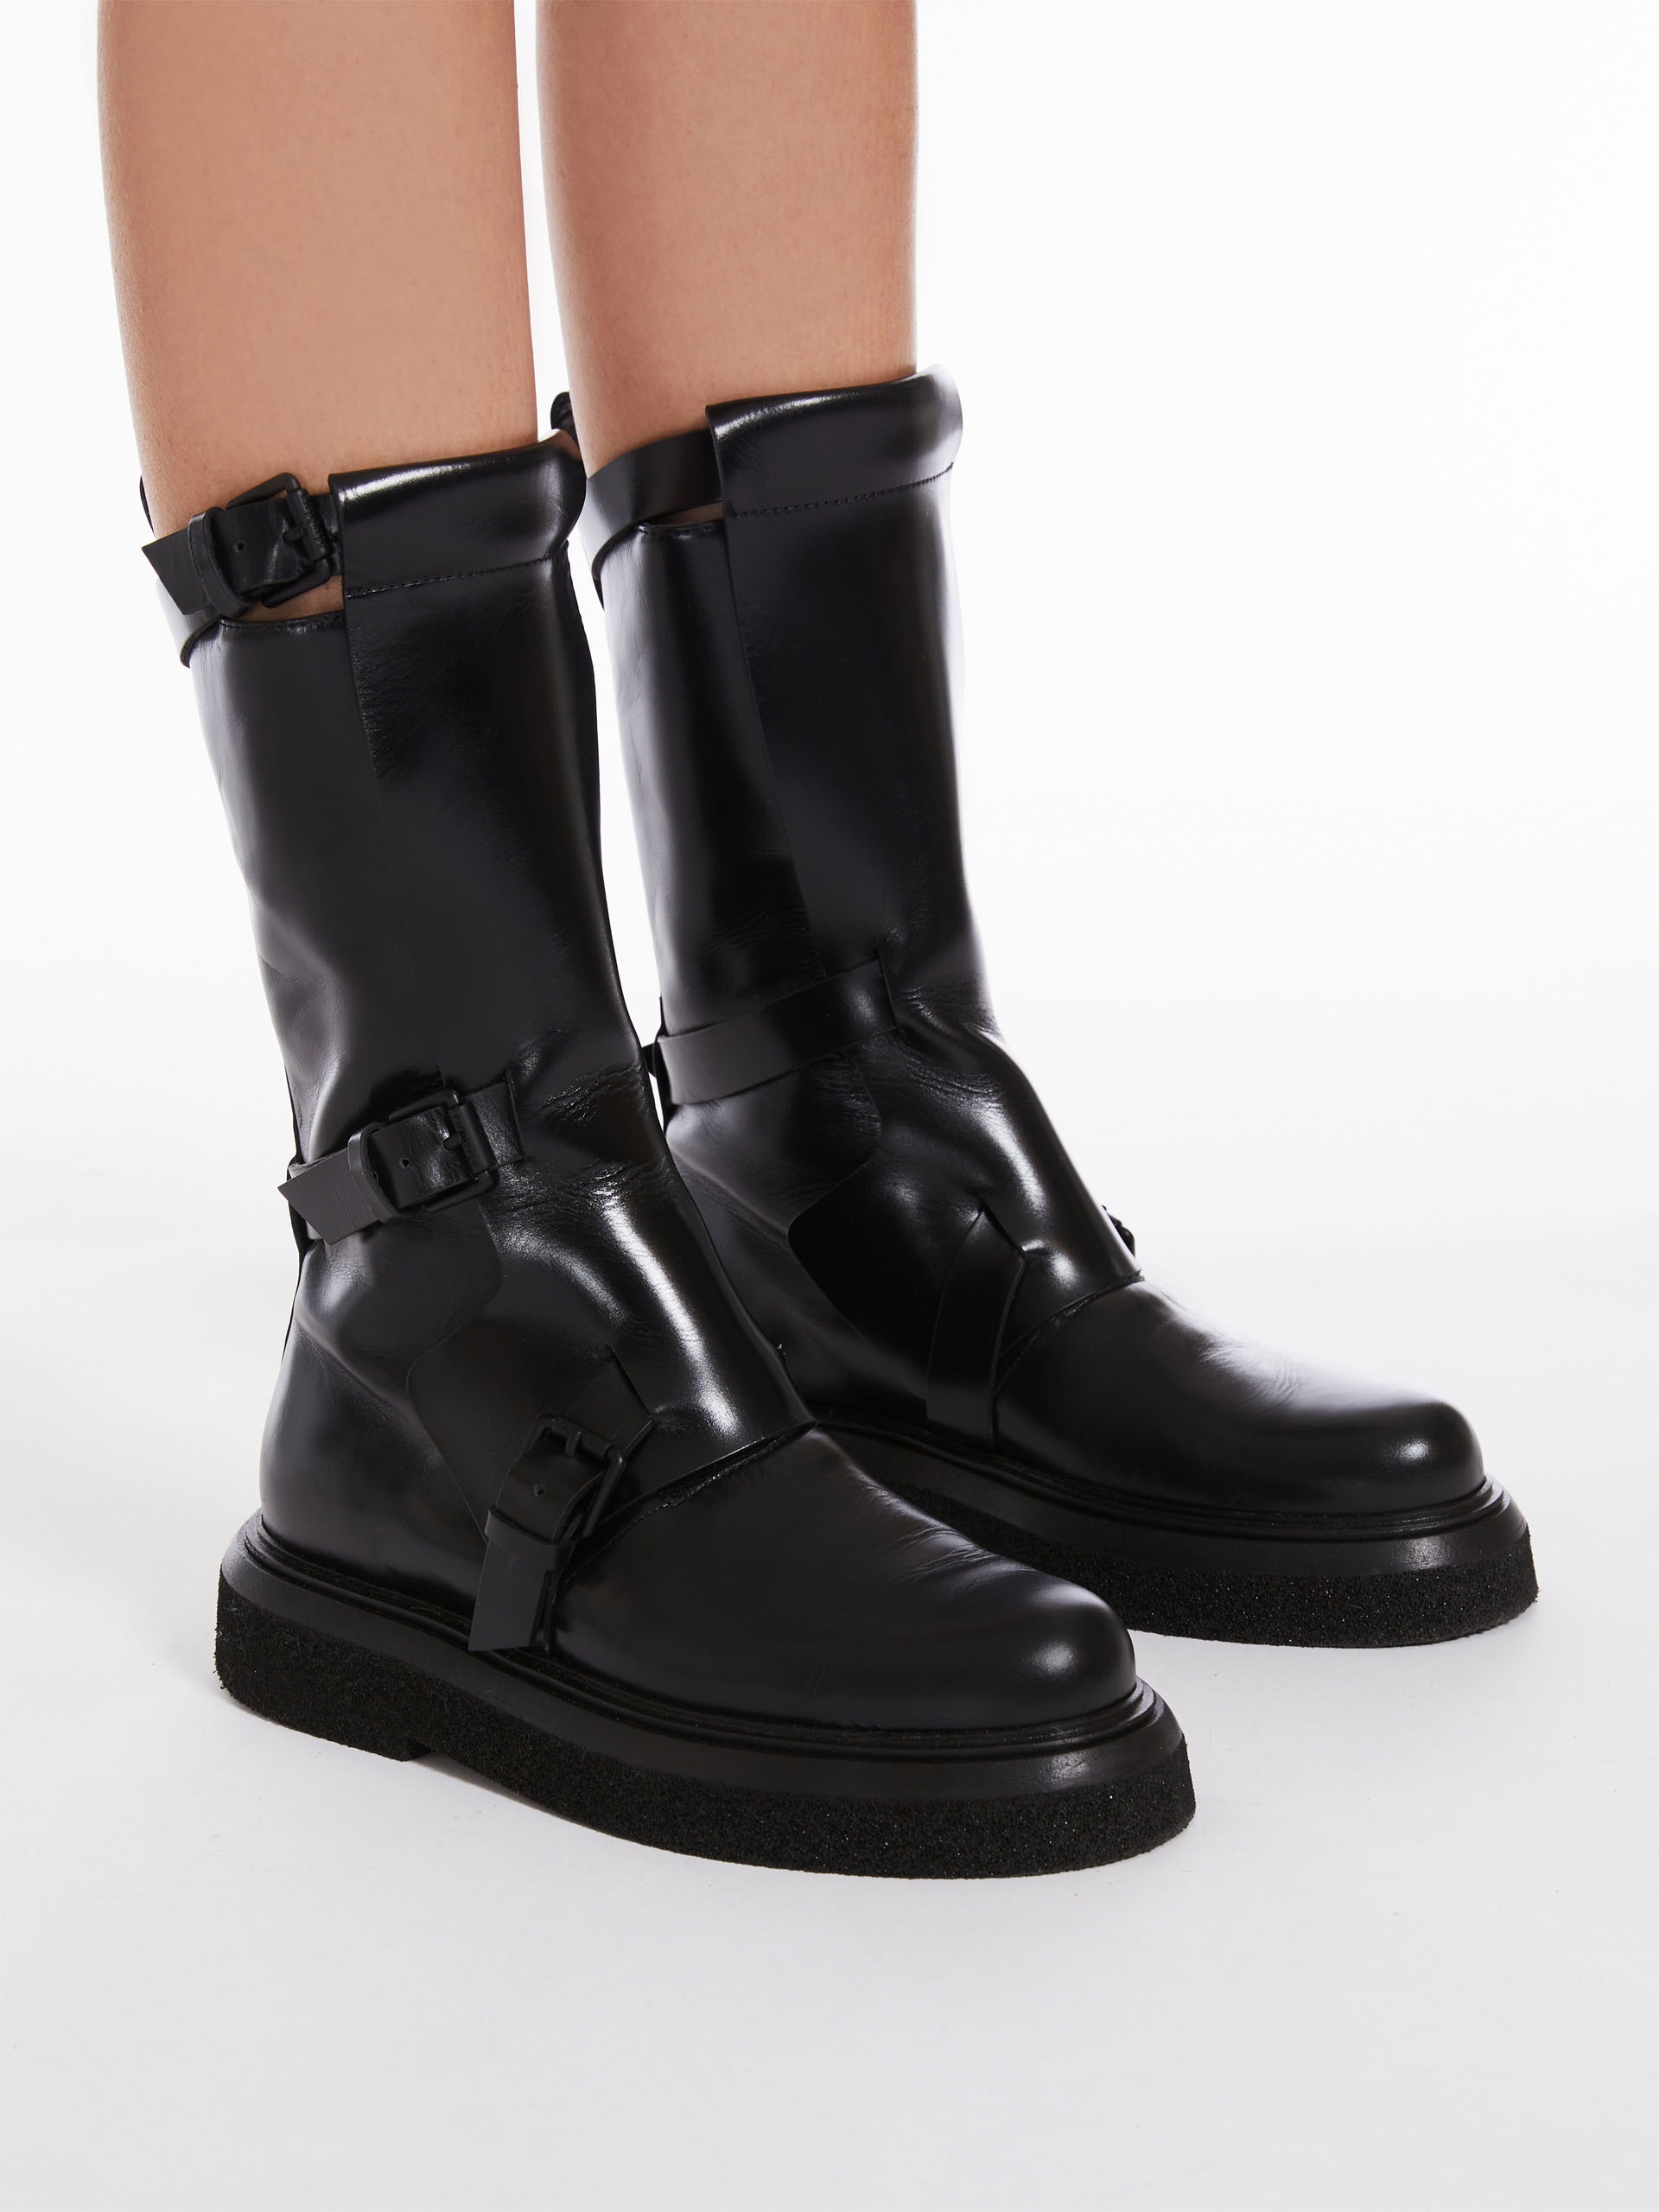 BUCKLESBOOT Leather biker boots with straps - 6